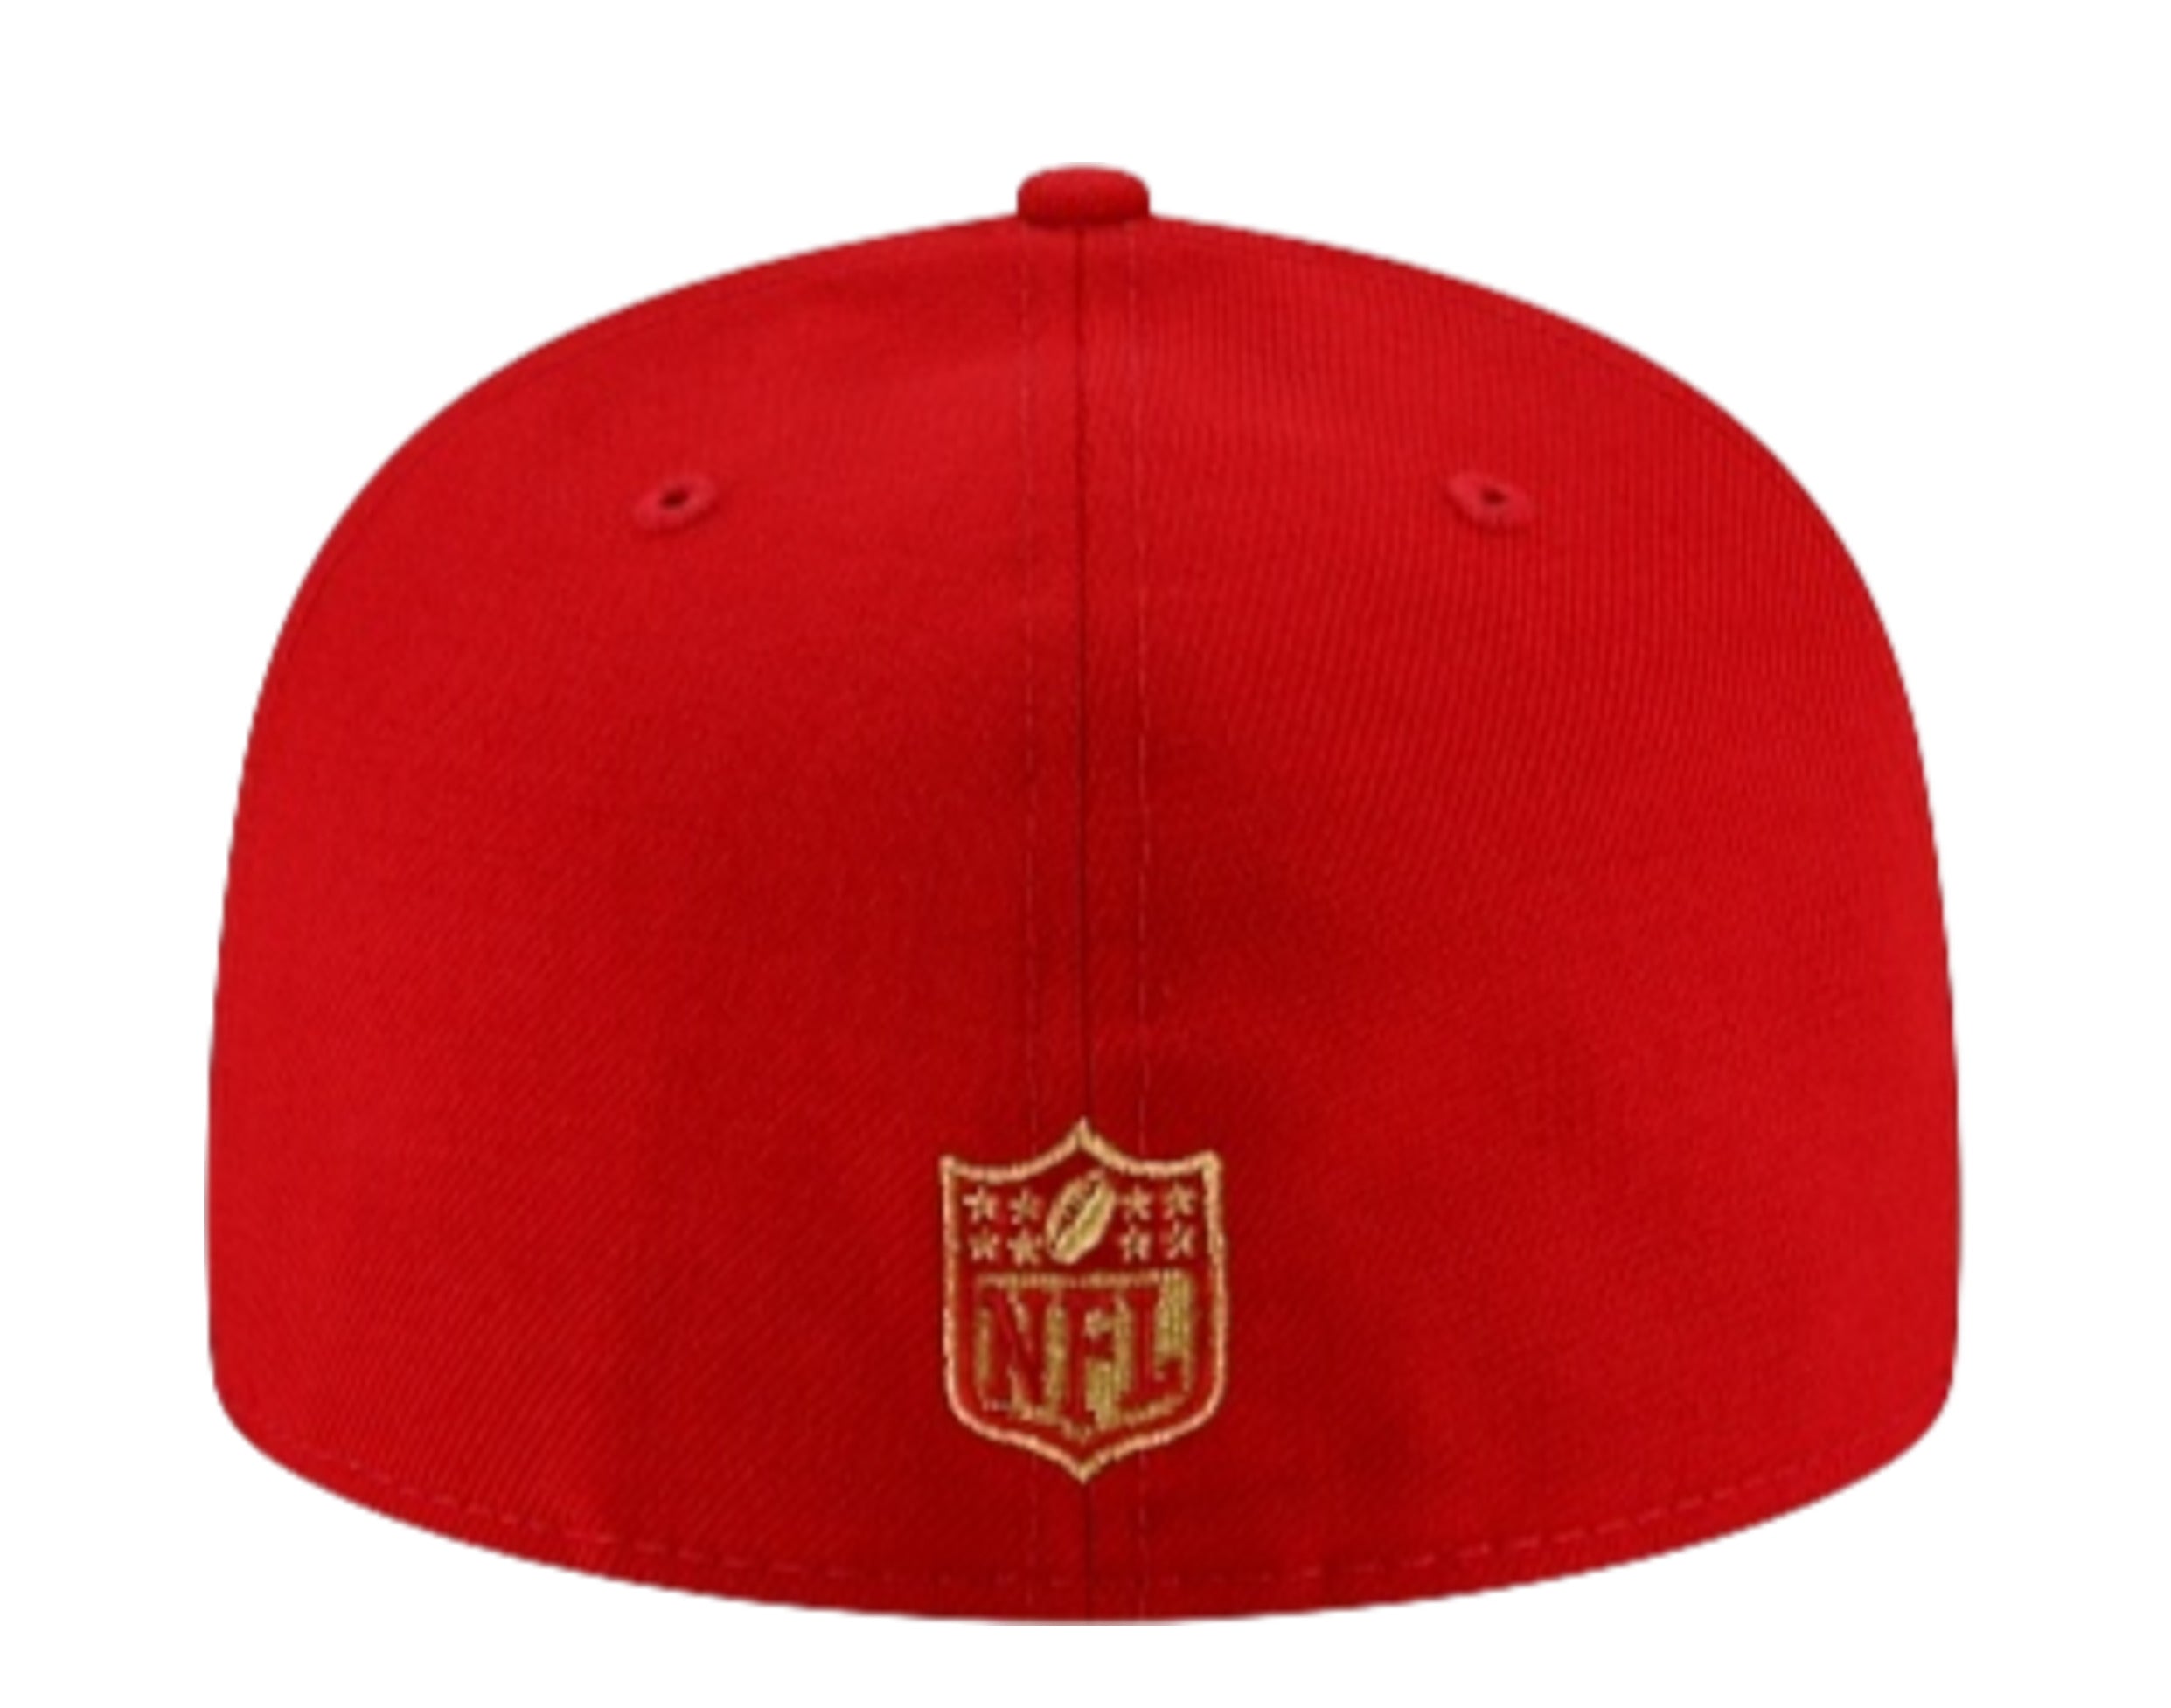 San Francisco 49ers PINK-BOTTOM Black Fitted Hat by New Era